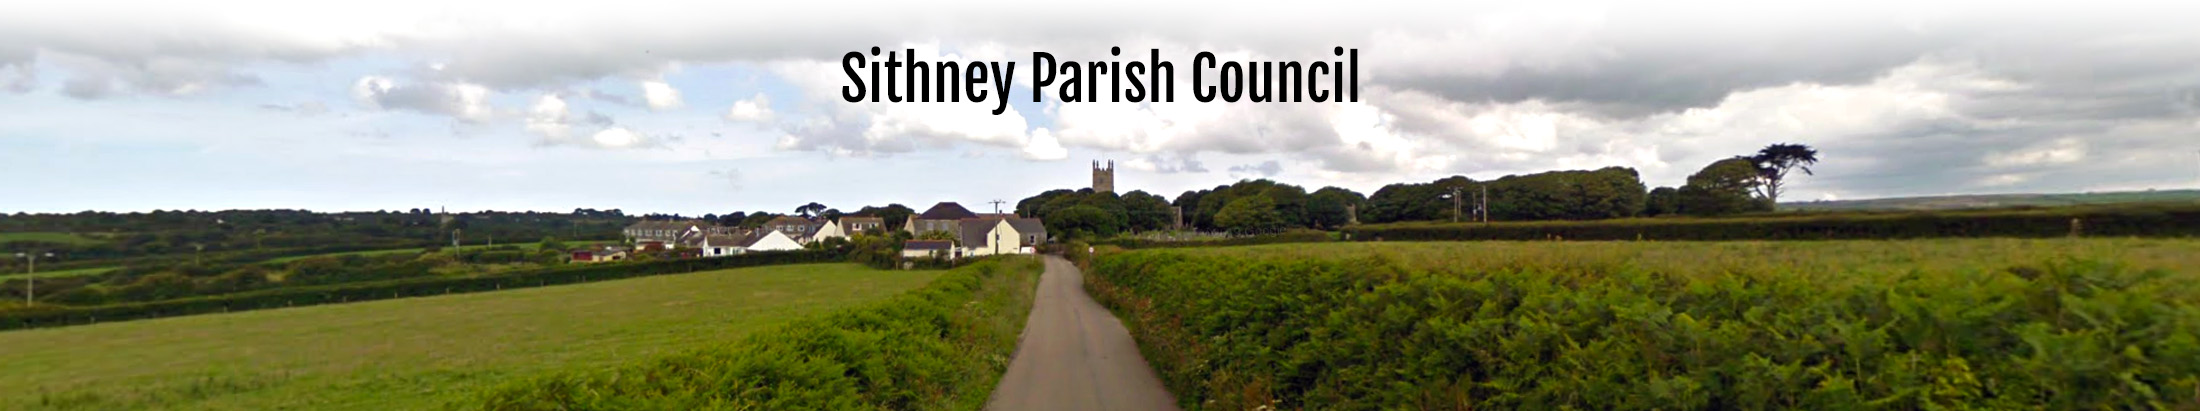 Header Image for Sithney Parish Council